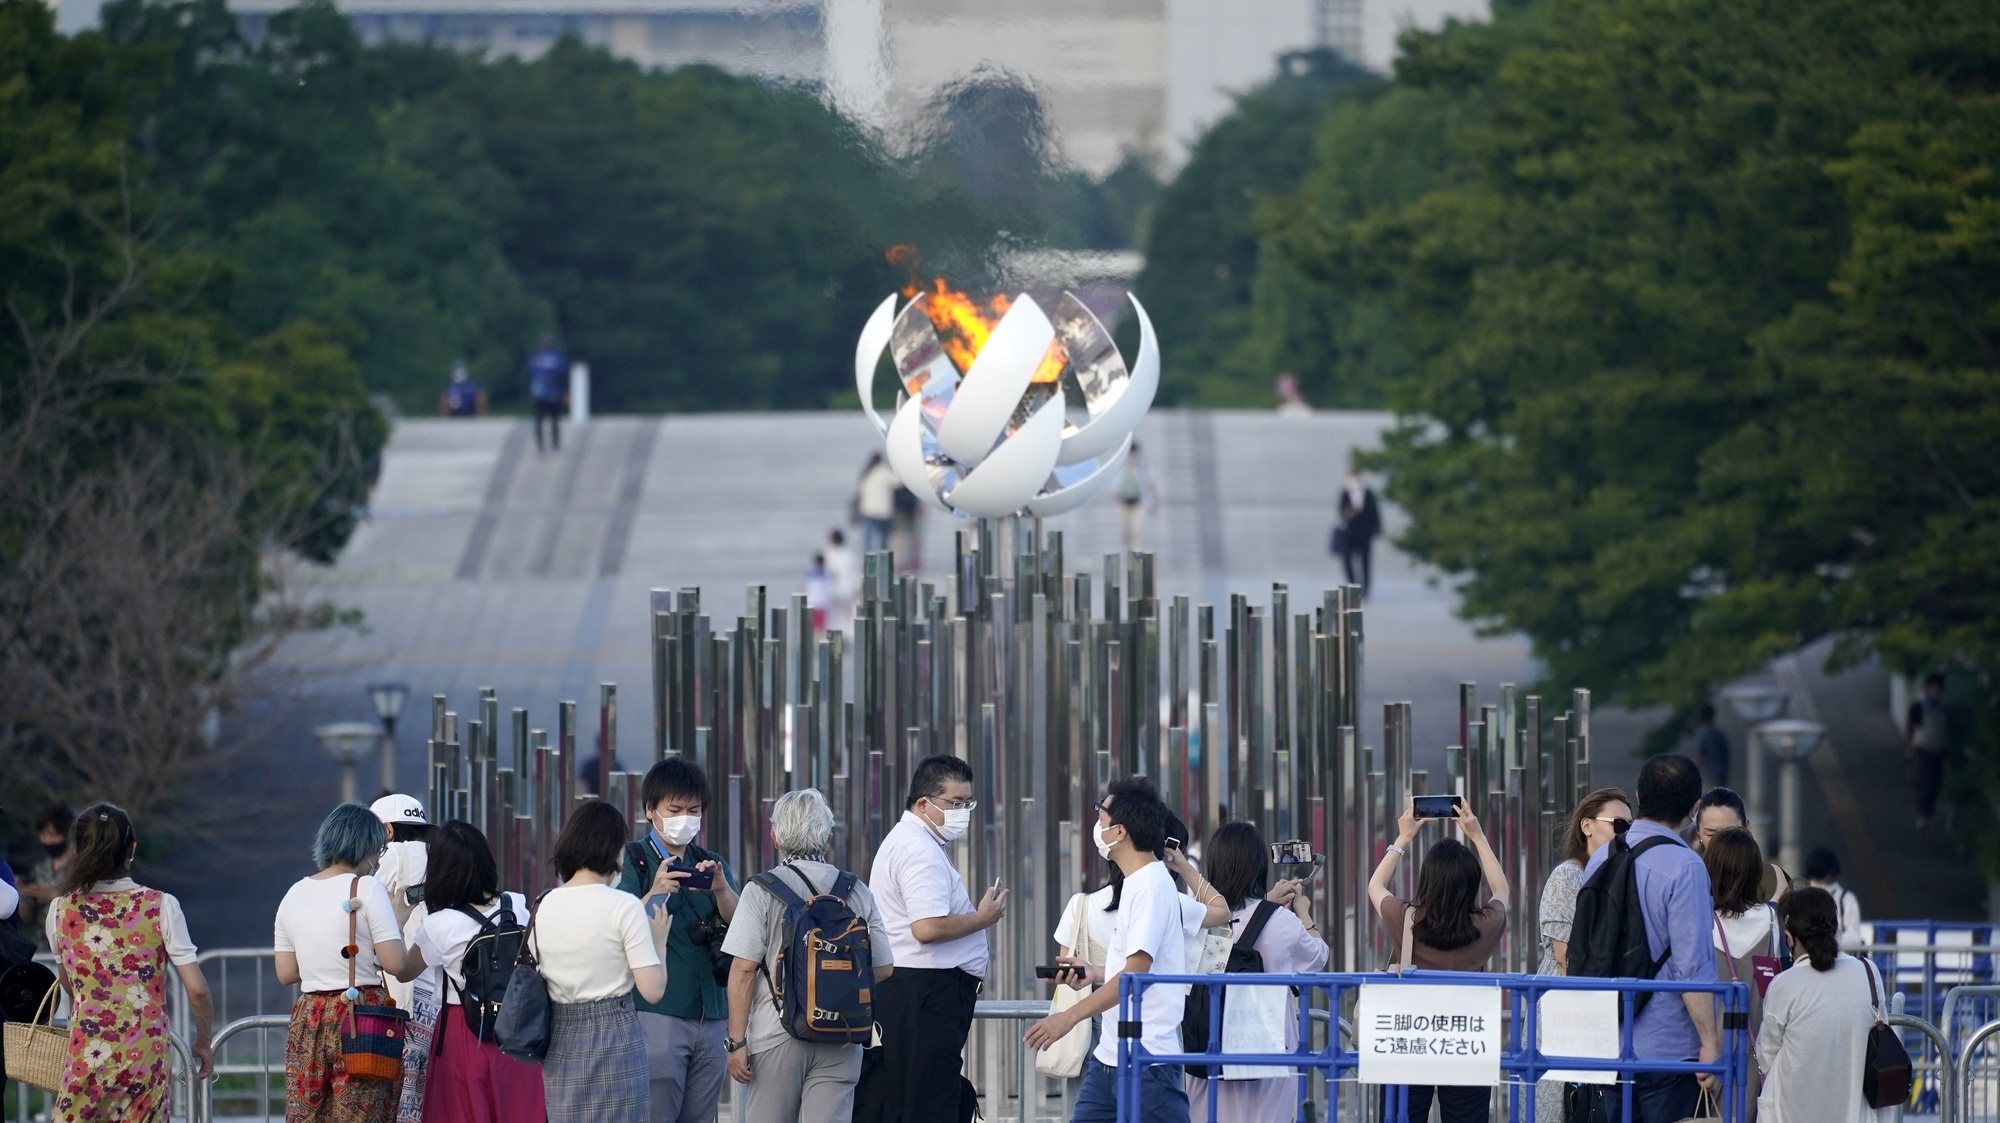 epa09373419 People take photos of the Olympic Flame in Tokyo, Japan, 28 July 2021. The Japanese capital recorded 3,177 new coronavirus cases on 28 July, hitting a new daily record for the second day in a row. It reported 2,848 cases on 27 July, adding further pressure on the country&#039;s health care system.  EPA/FRANCK ROBICHON